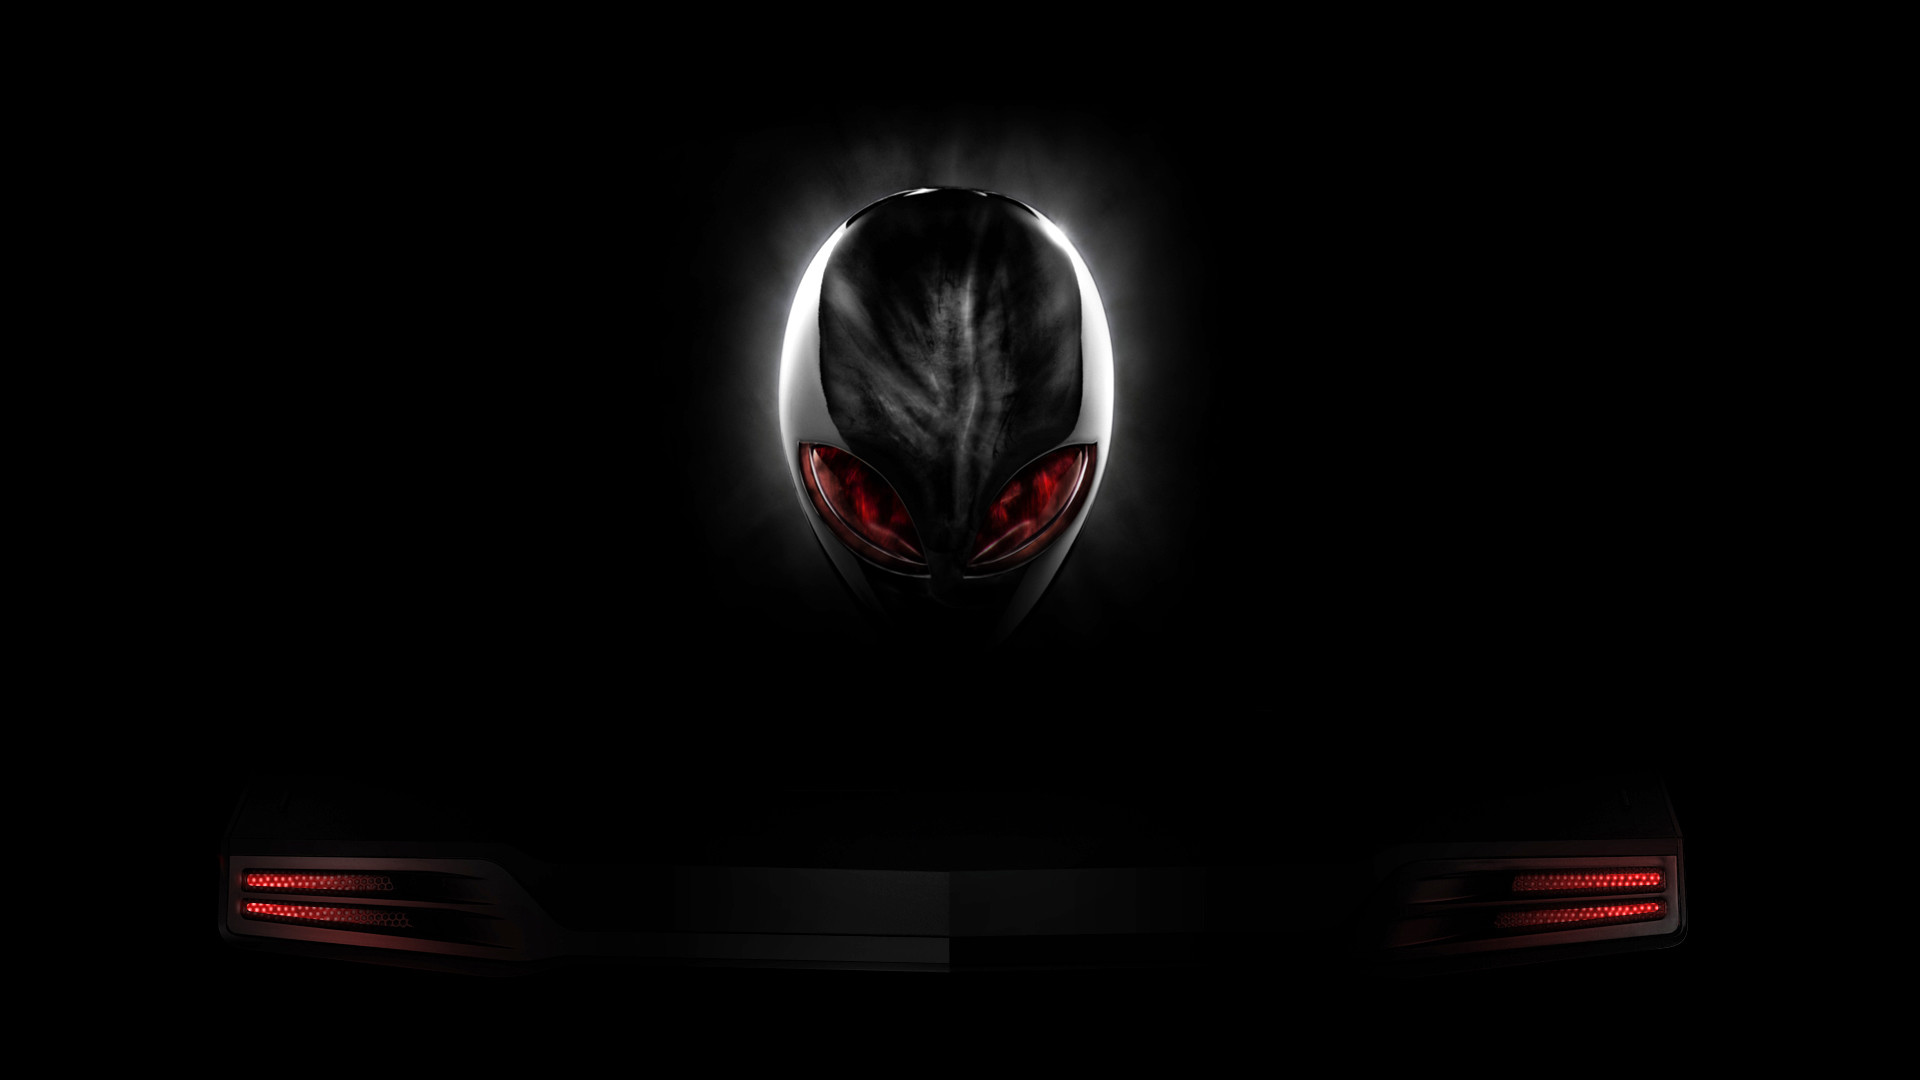 1920x1080 Red And Black Wallpaper 1080p Alienware red eyes logo black